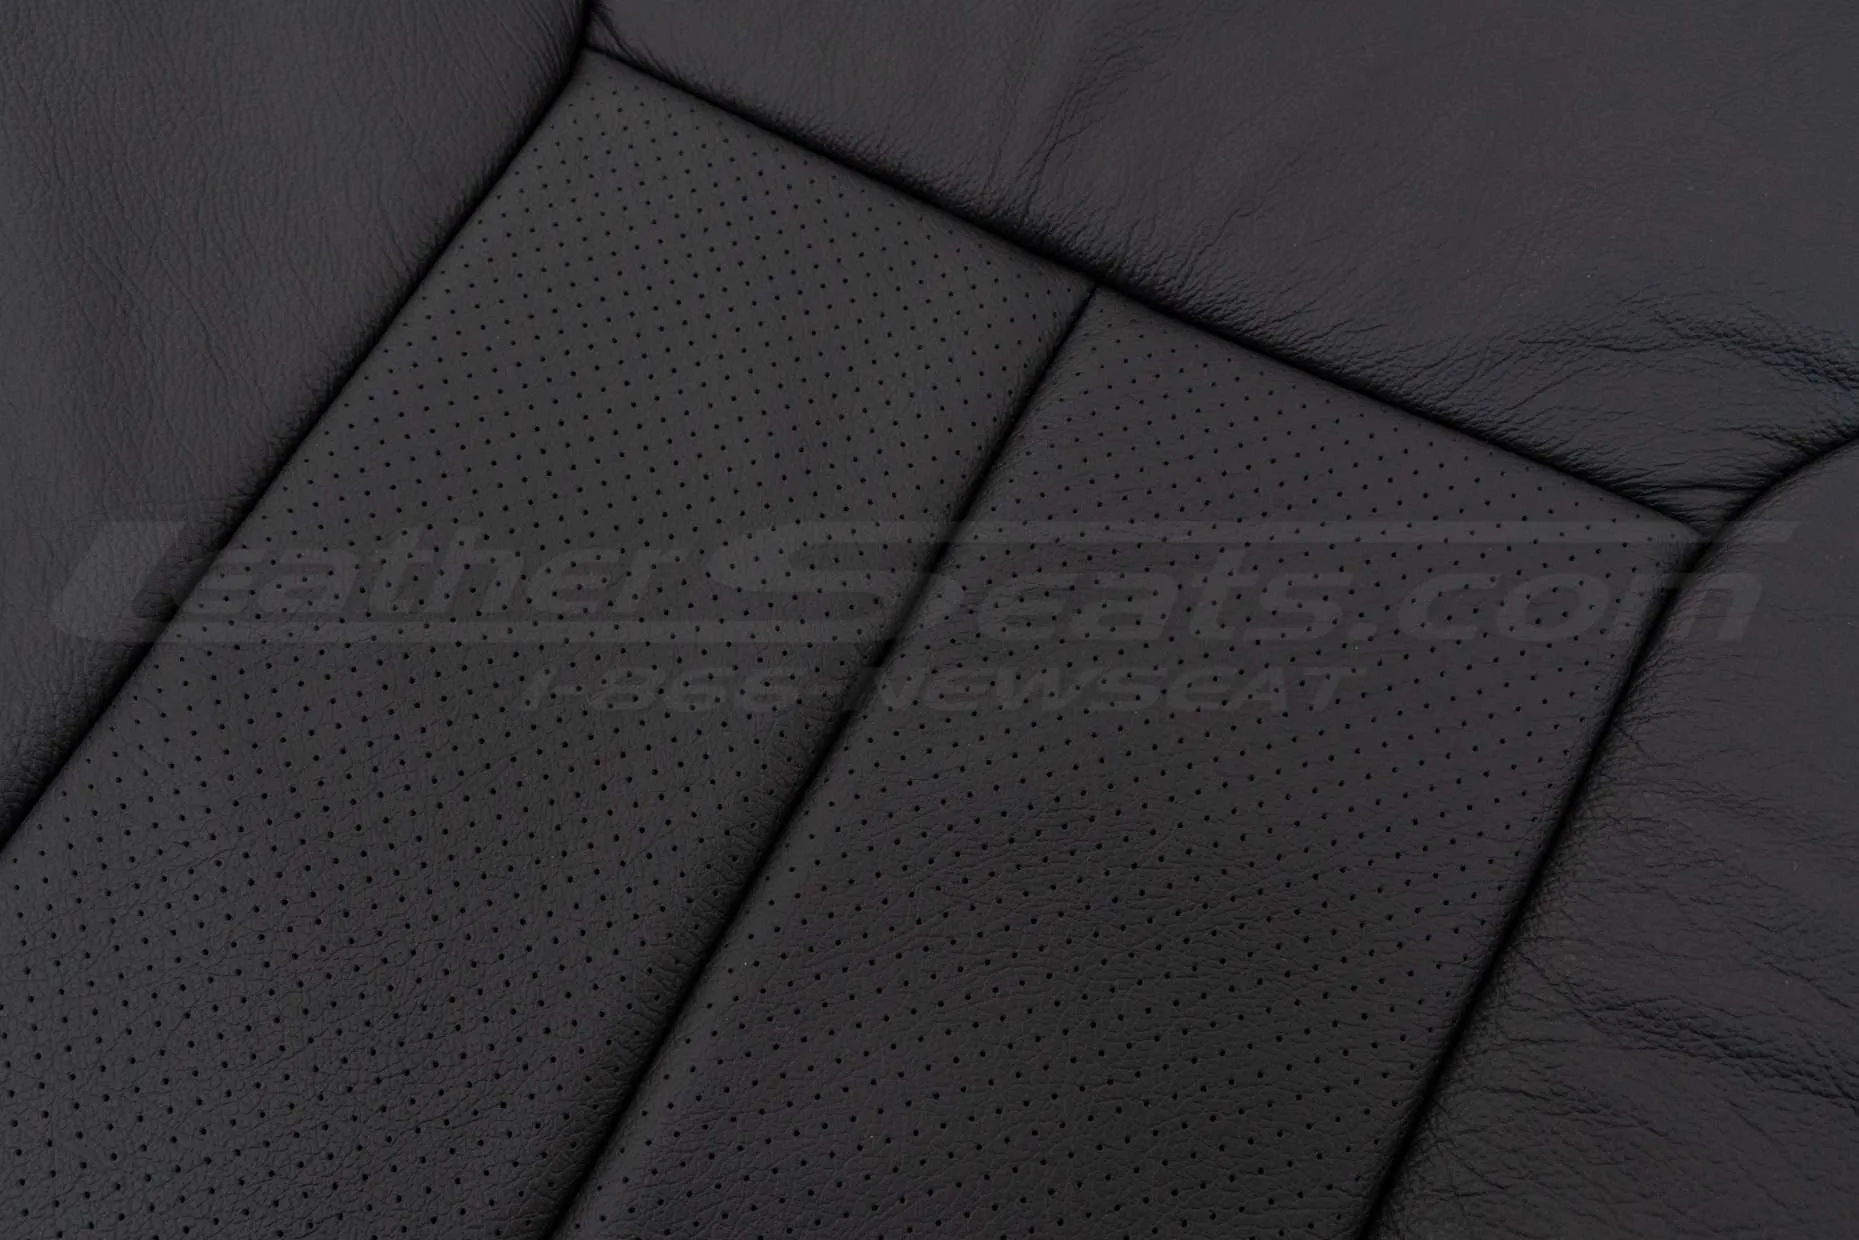 Perforation and leather texture close-up